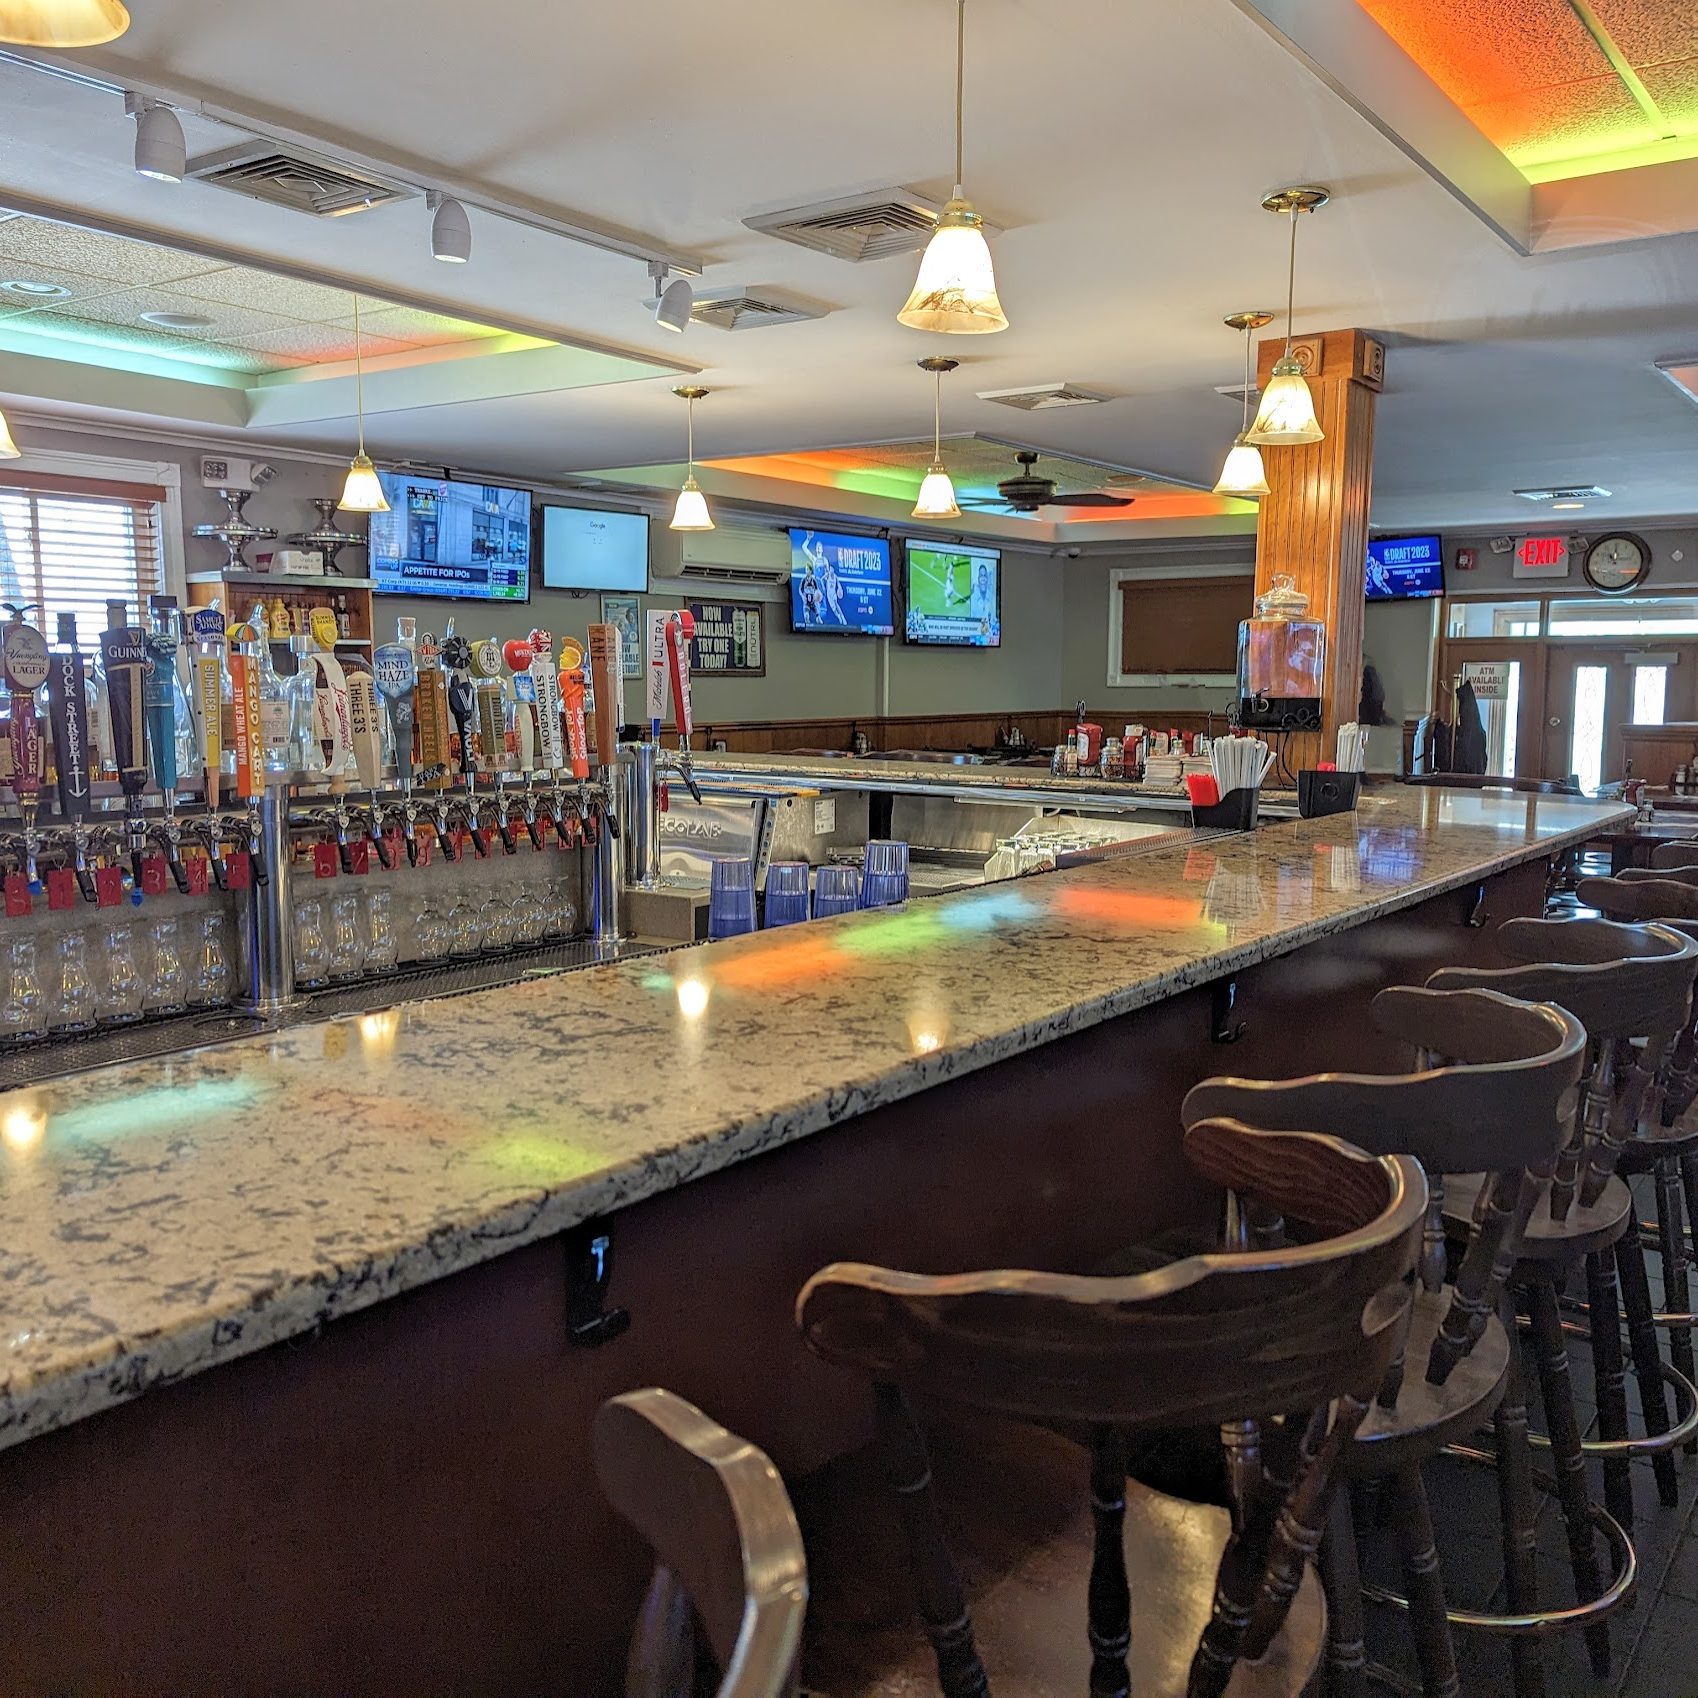 A bar with stools and televisions.